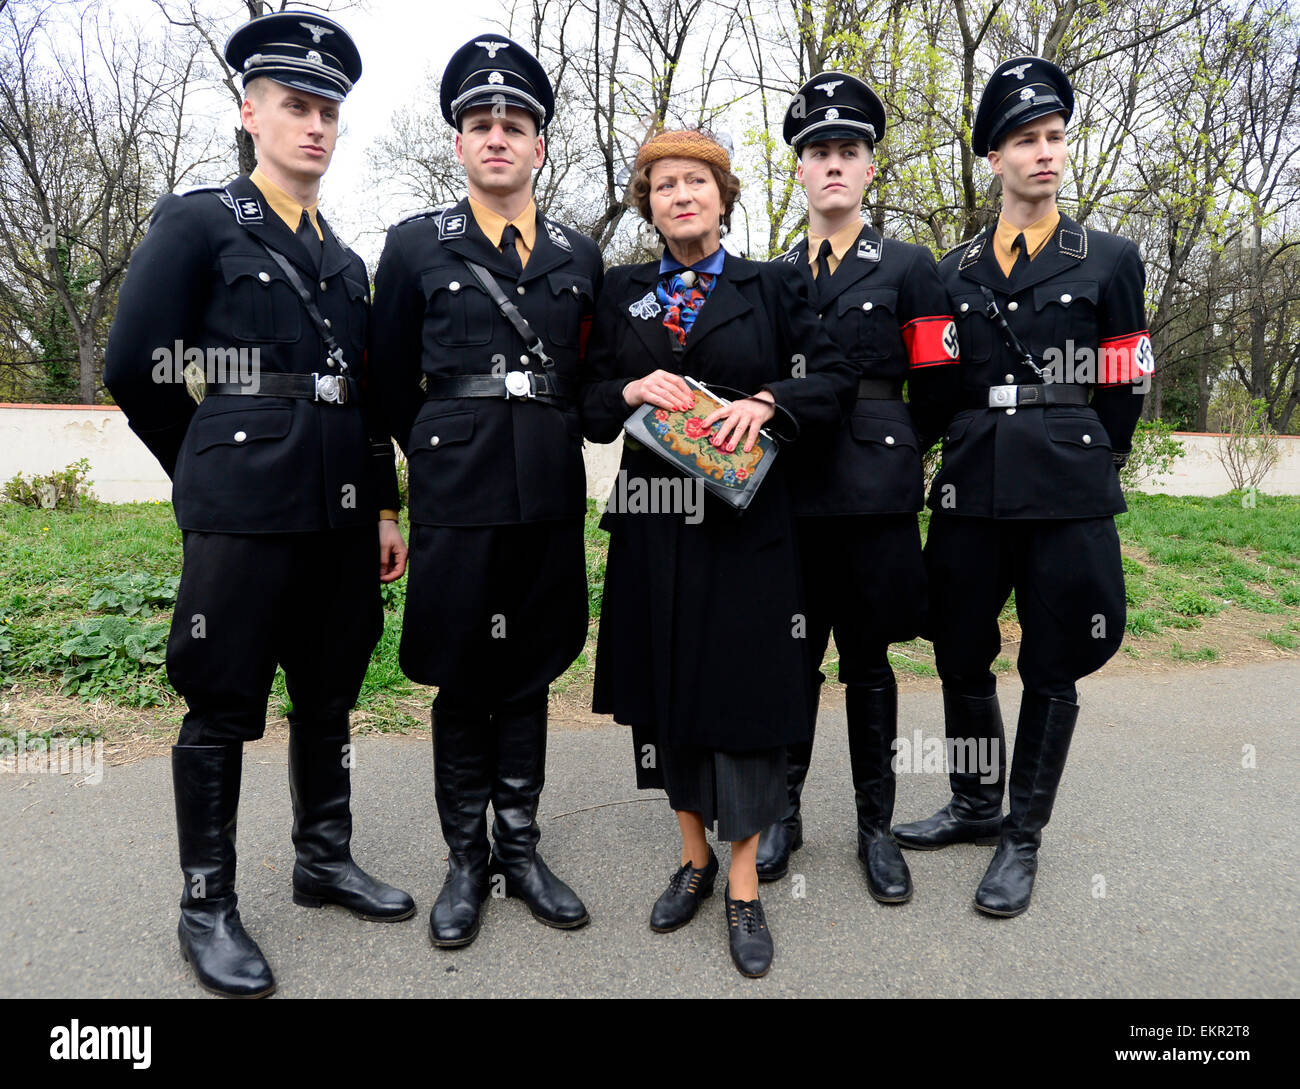 Shooting of the film about Czechoslovak film star Lida Baarova starts in the Olsany cemetary, Prague, Czech Republic, April 13, 2015. Pictured centre Simona Stasova. The lead role in the prepared Czech film about actress Baarova, who was mistress of Nazi Germany´s Propaganda Minister Joseph Goebbels before the war, will play Slovak actress Tana Pauhofova. Stock Photo